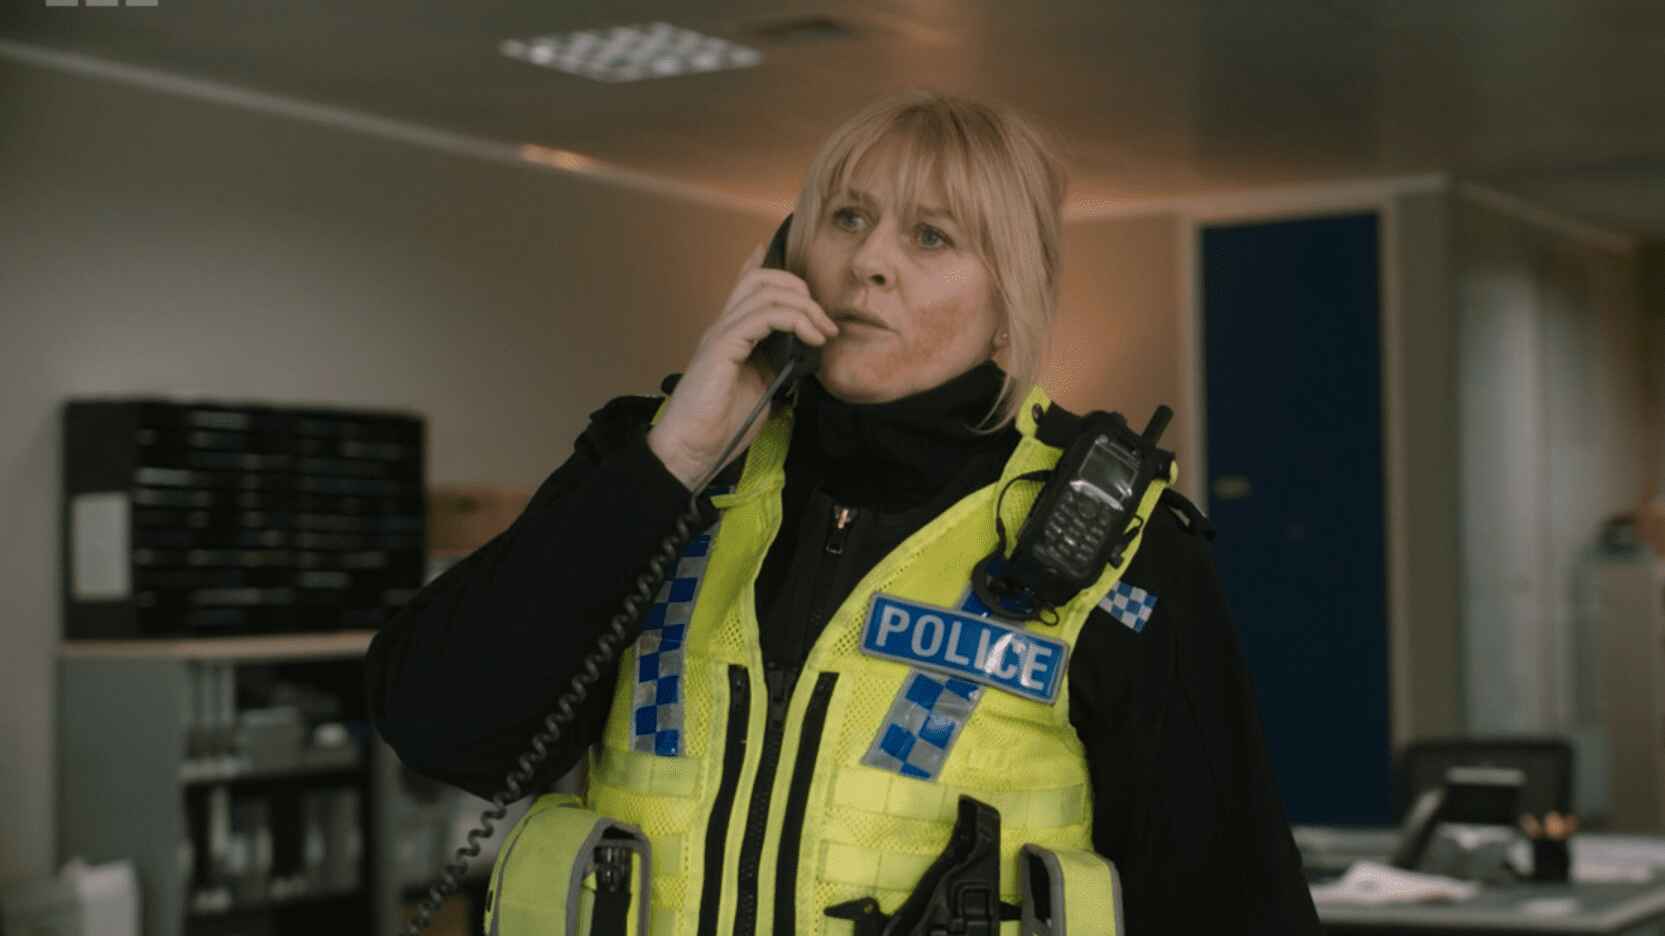 When Is Happy Valley Coming Back? – The Potential Return